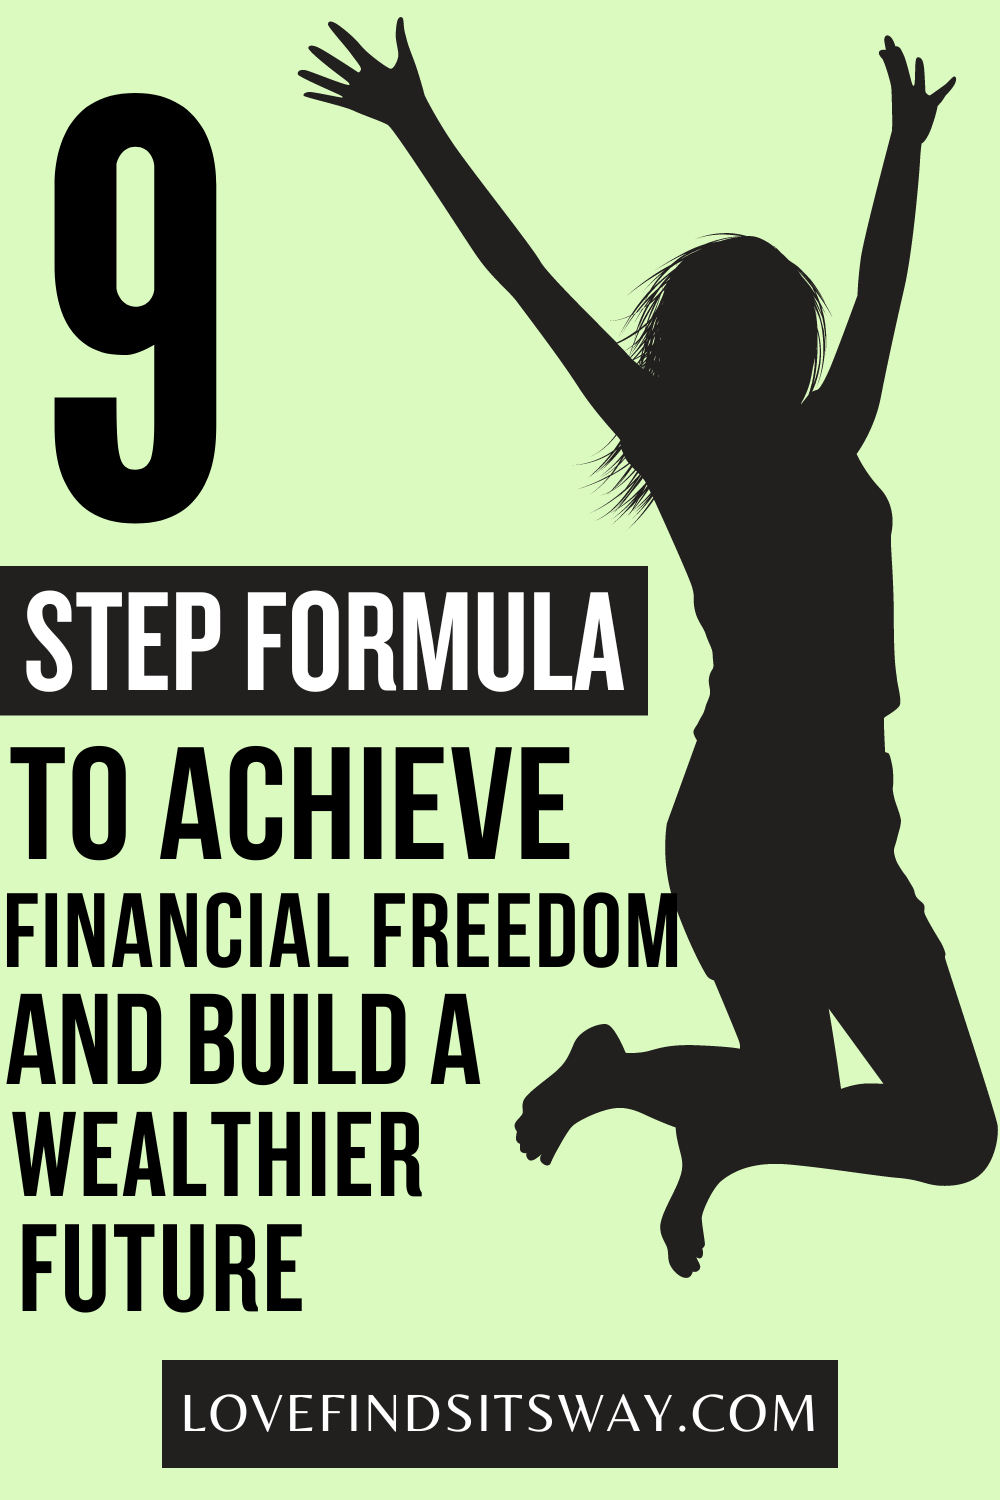 9-Steps-To-Achieve-Financial-Freedom-Build-a-Wealthier-Future